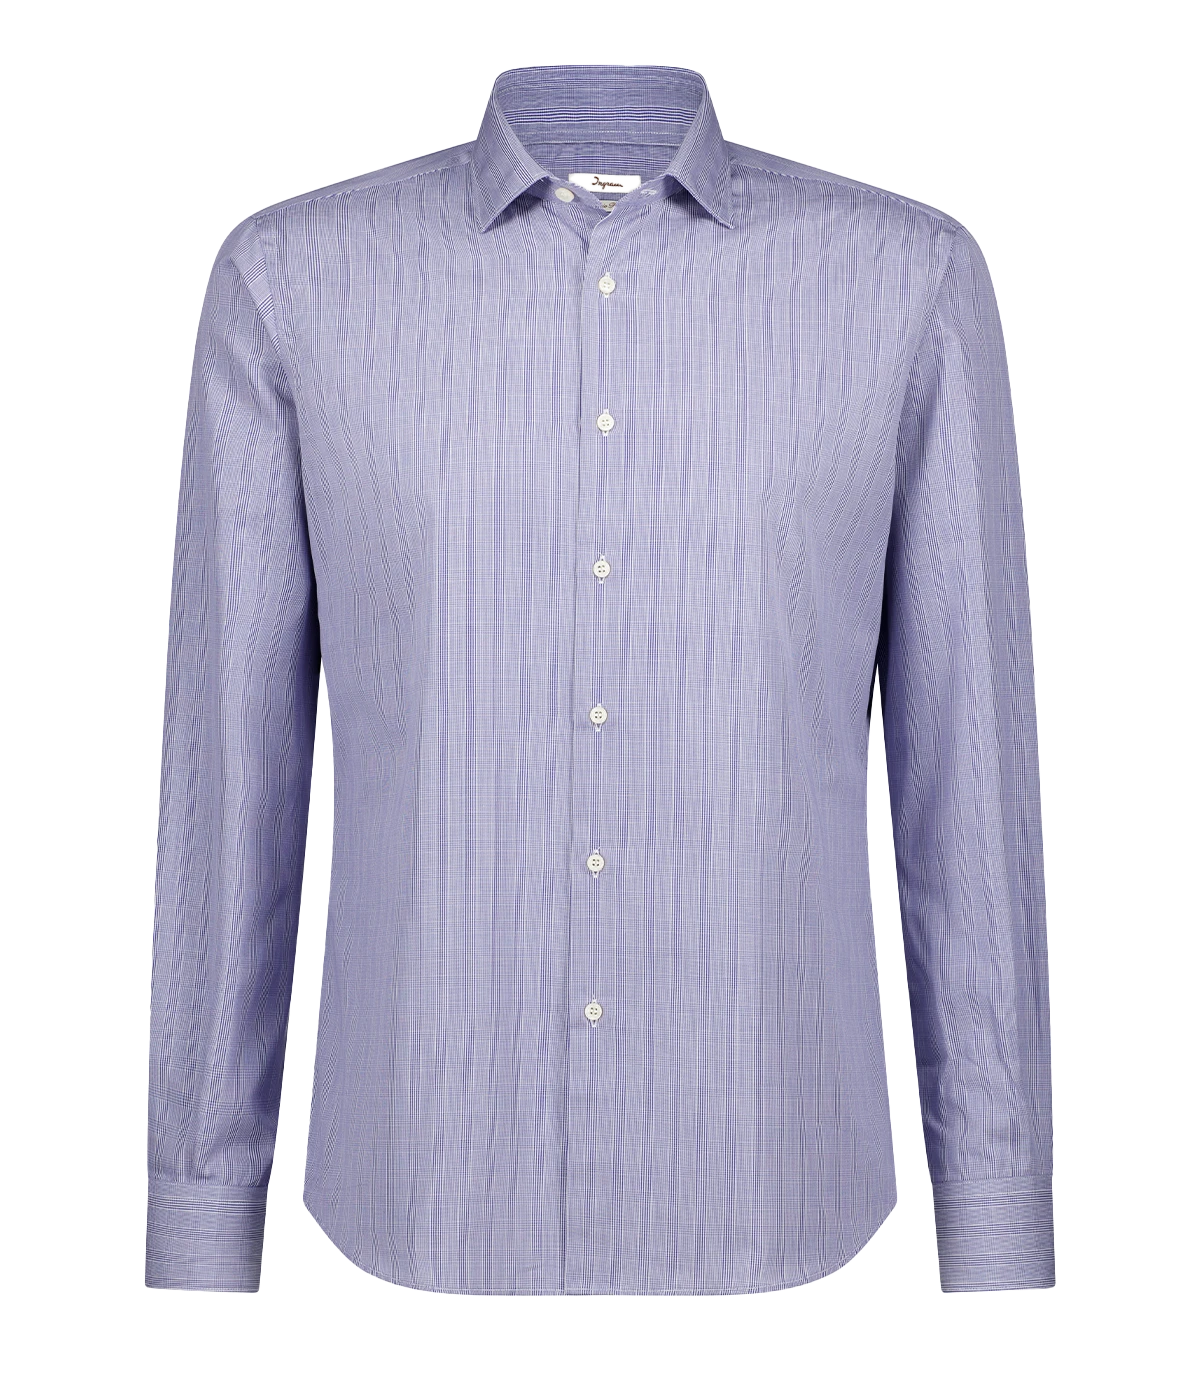 A work staple slim fit business shirt, 100% cotton, button up & collar detailing in a blue and white check print. Cotton, long sleeve, casual shirt, business shirt. 